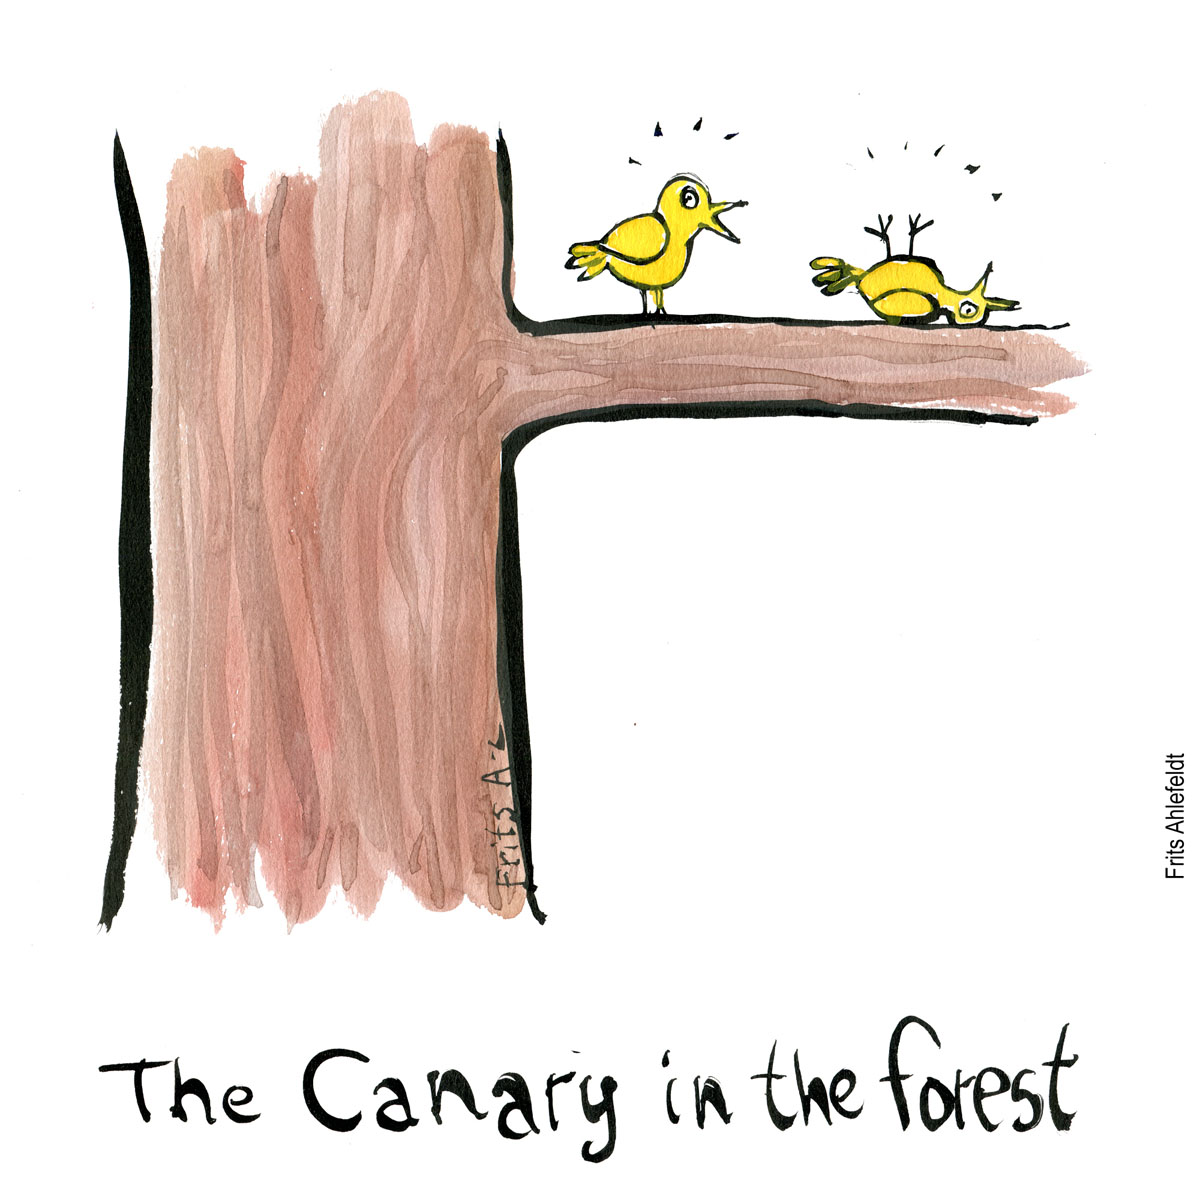 Drawing of canary dead and alive in a tree - Biodiversity as the canary in the mine. Biodiversity illustration by Frits Ahlefeldt